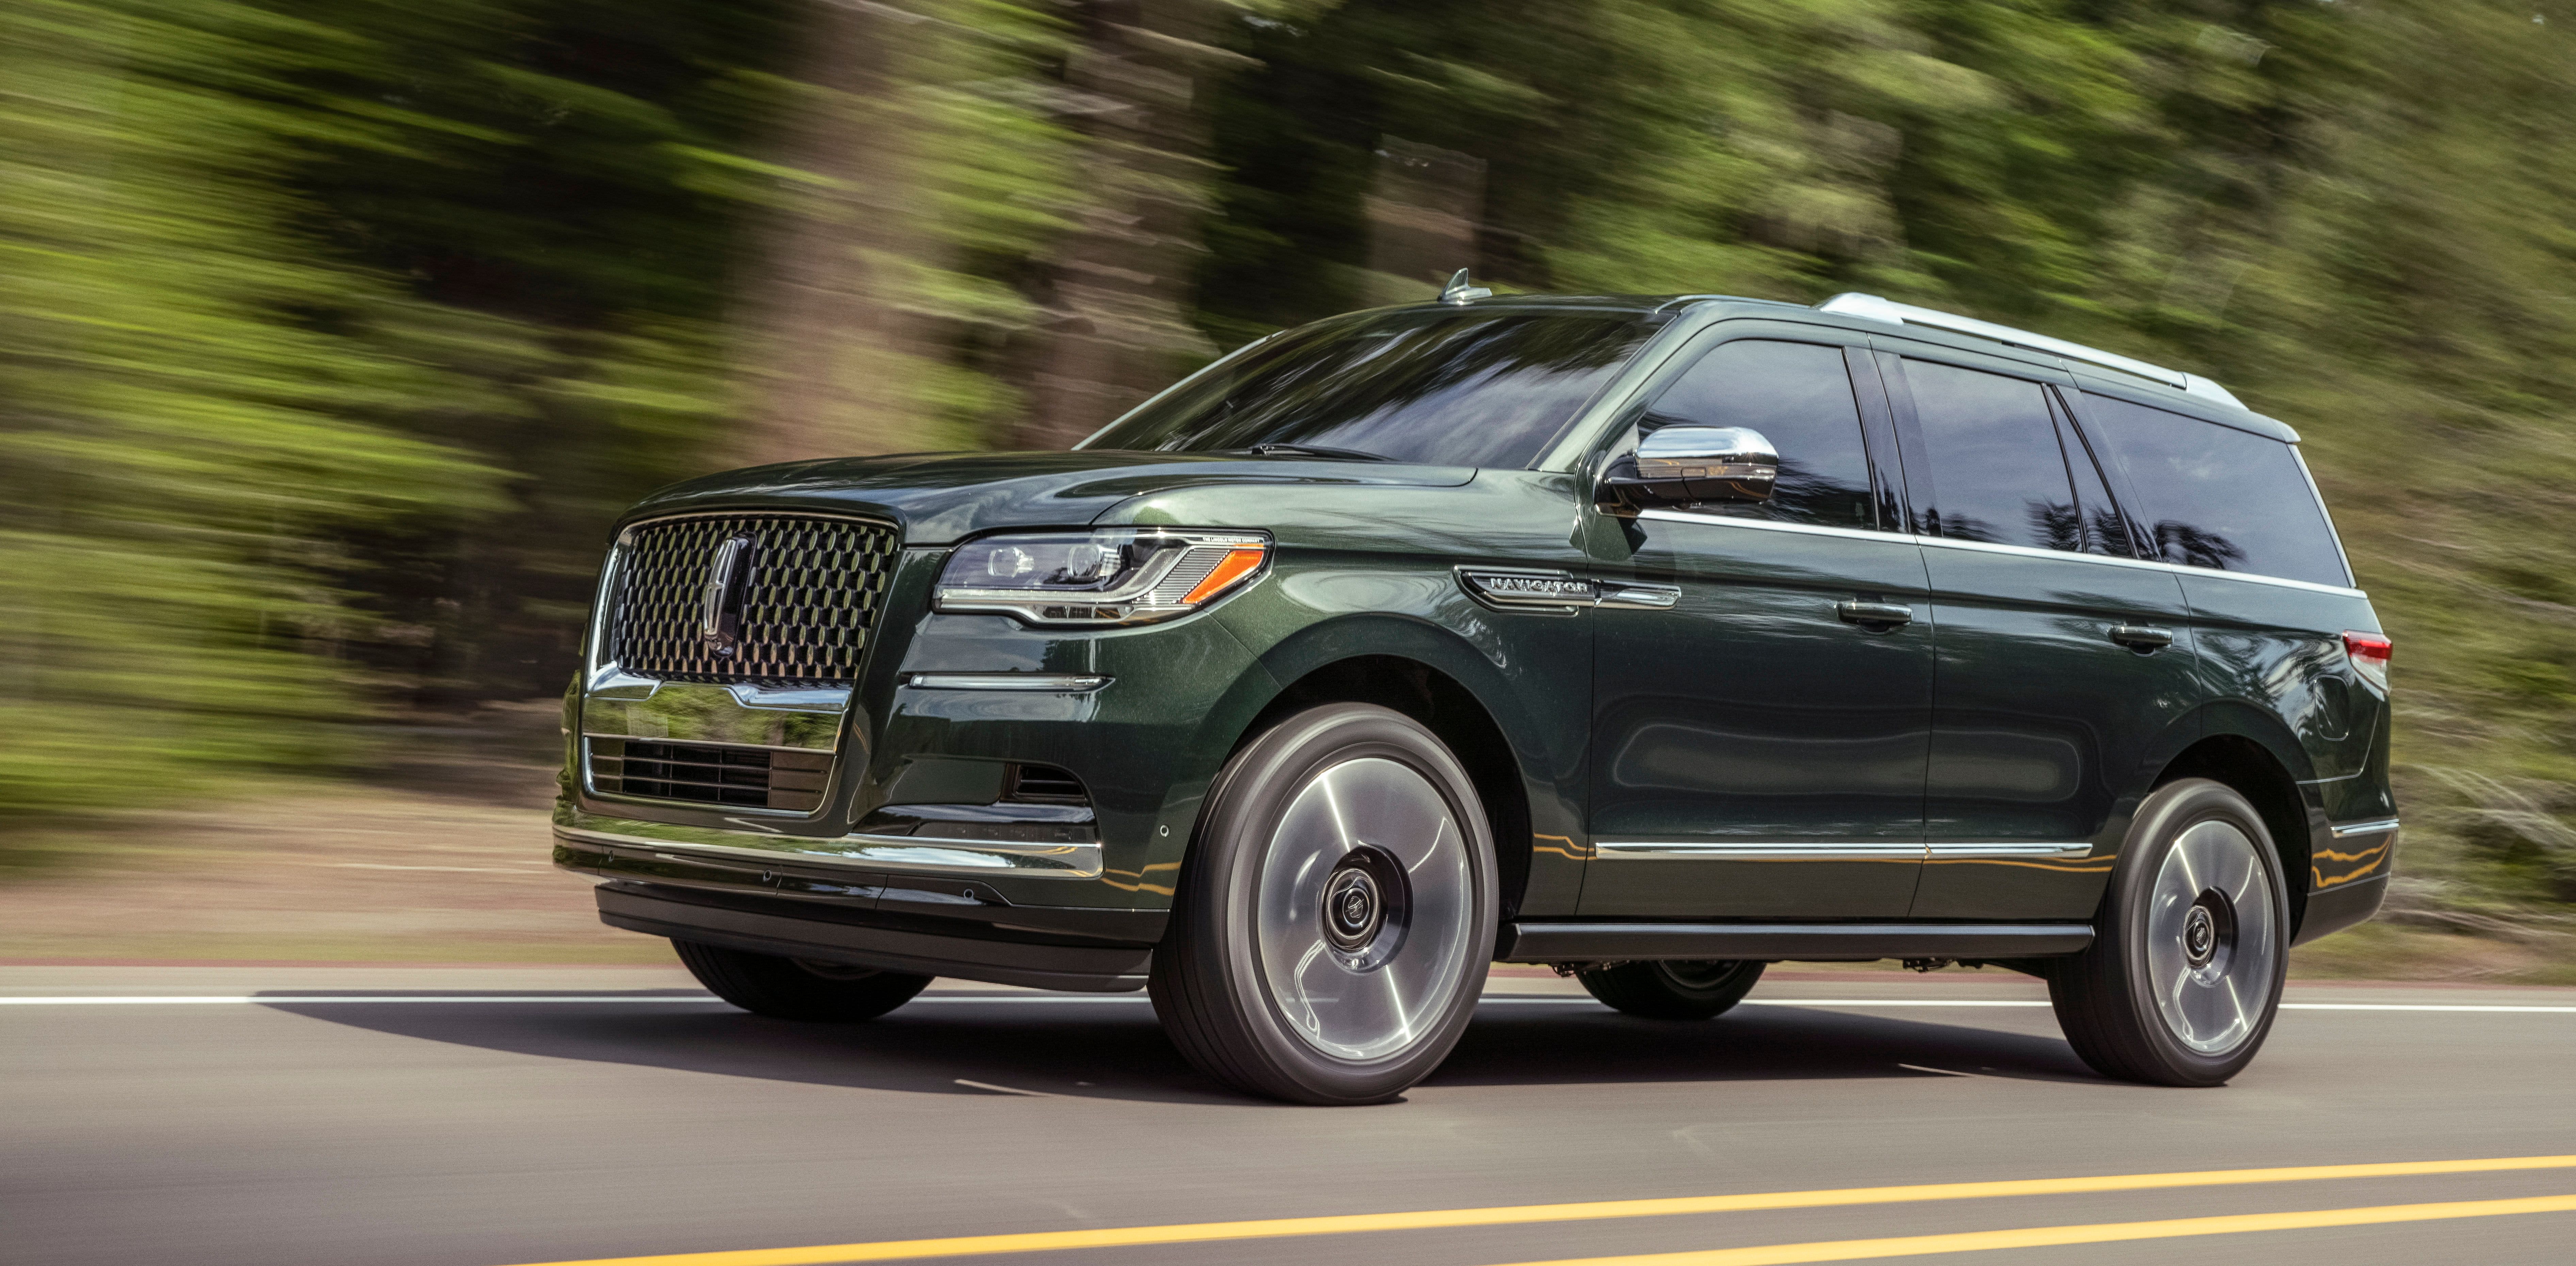 Ford unveils 2022 Lincoln Navigator with hands-free driving